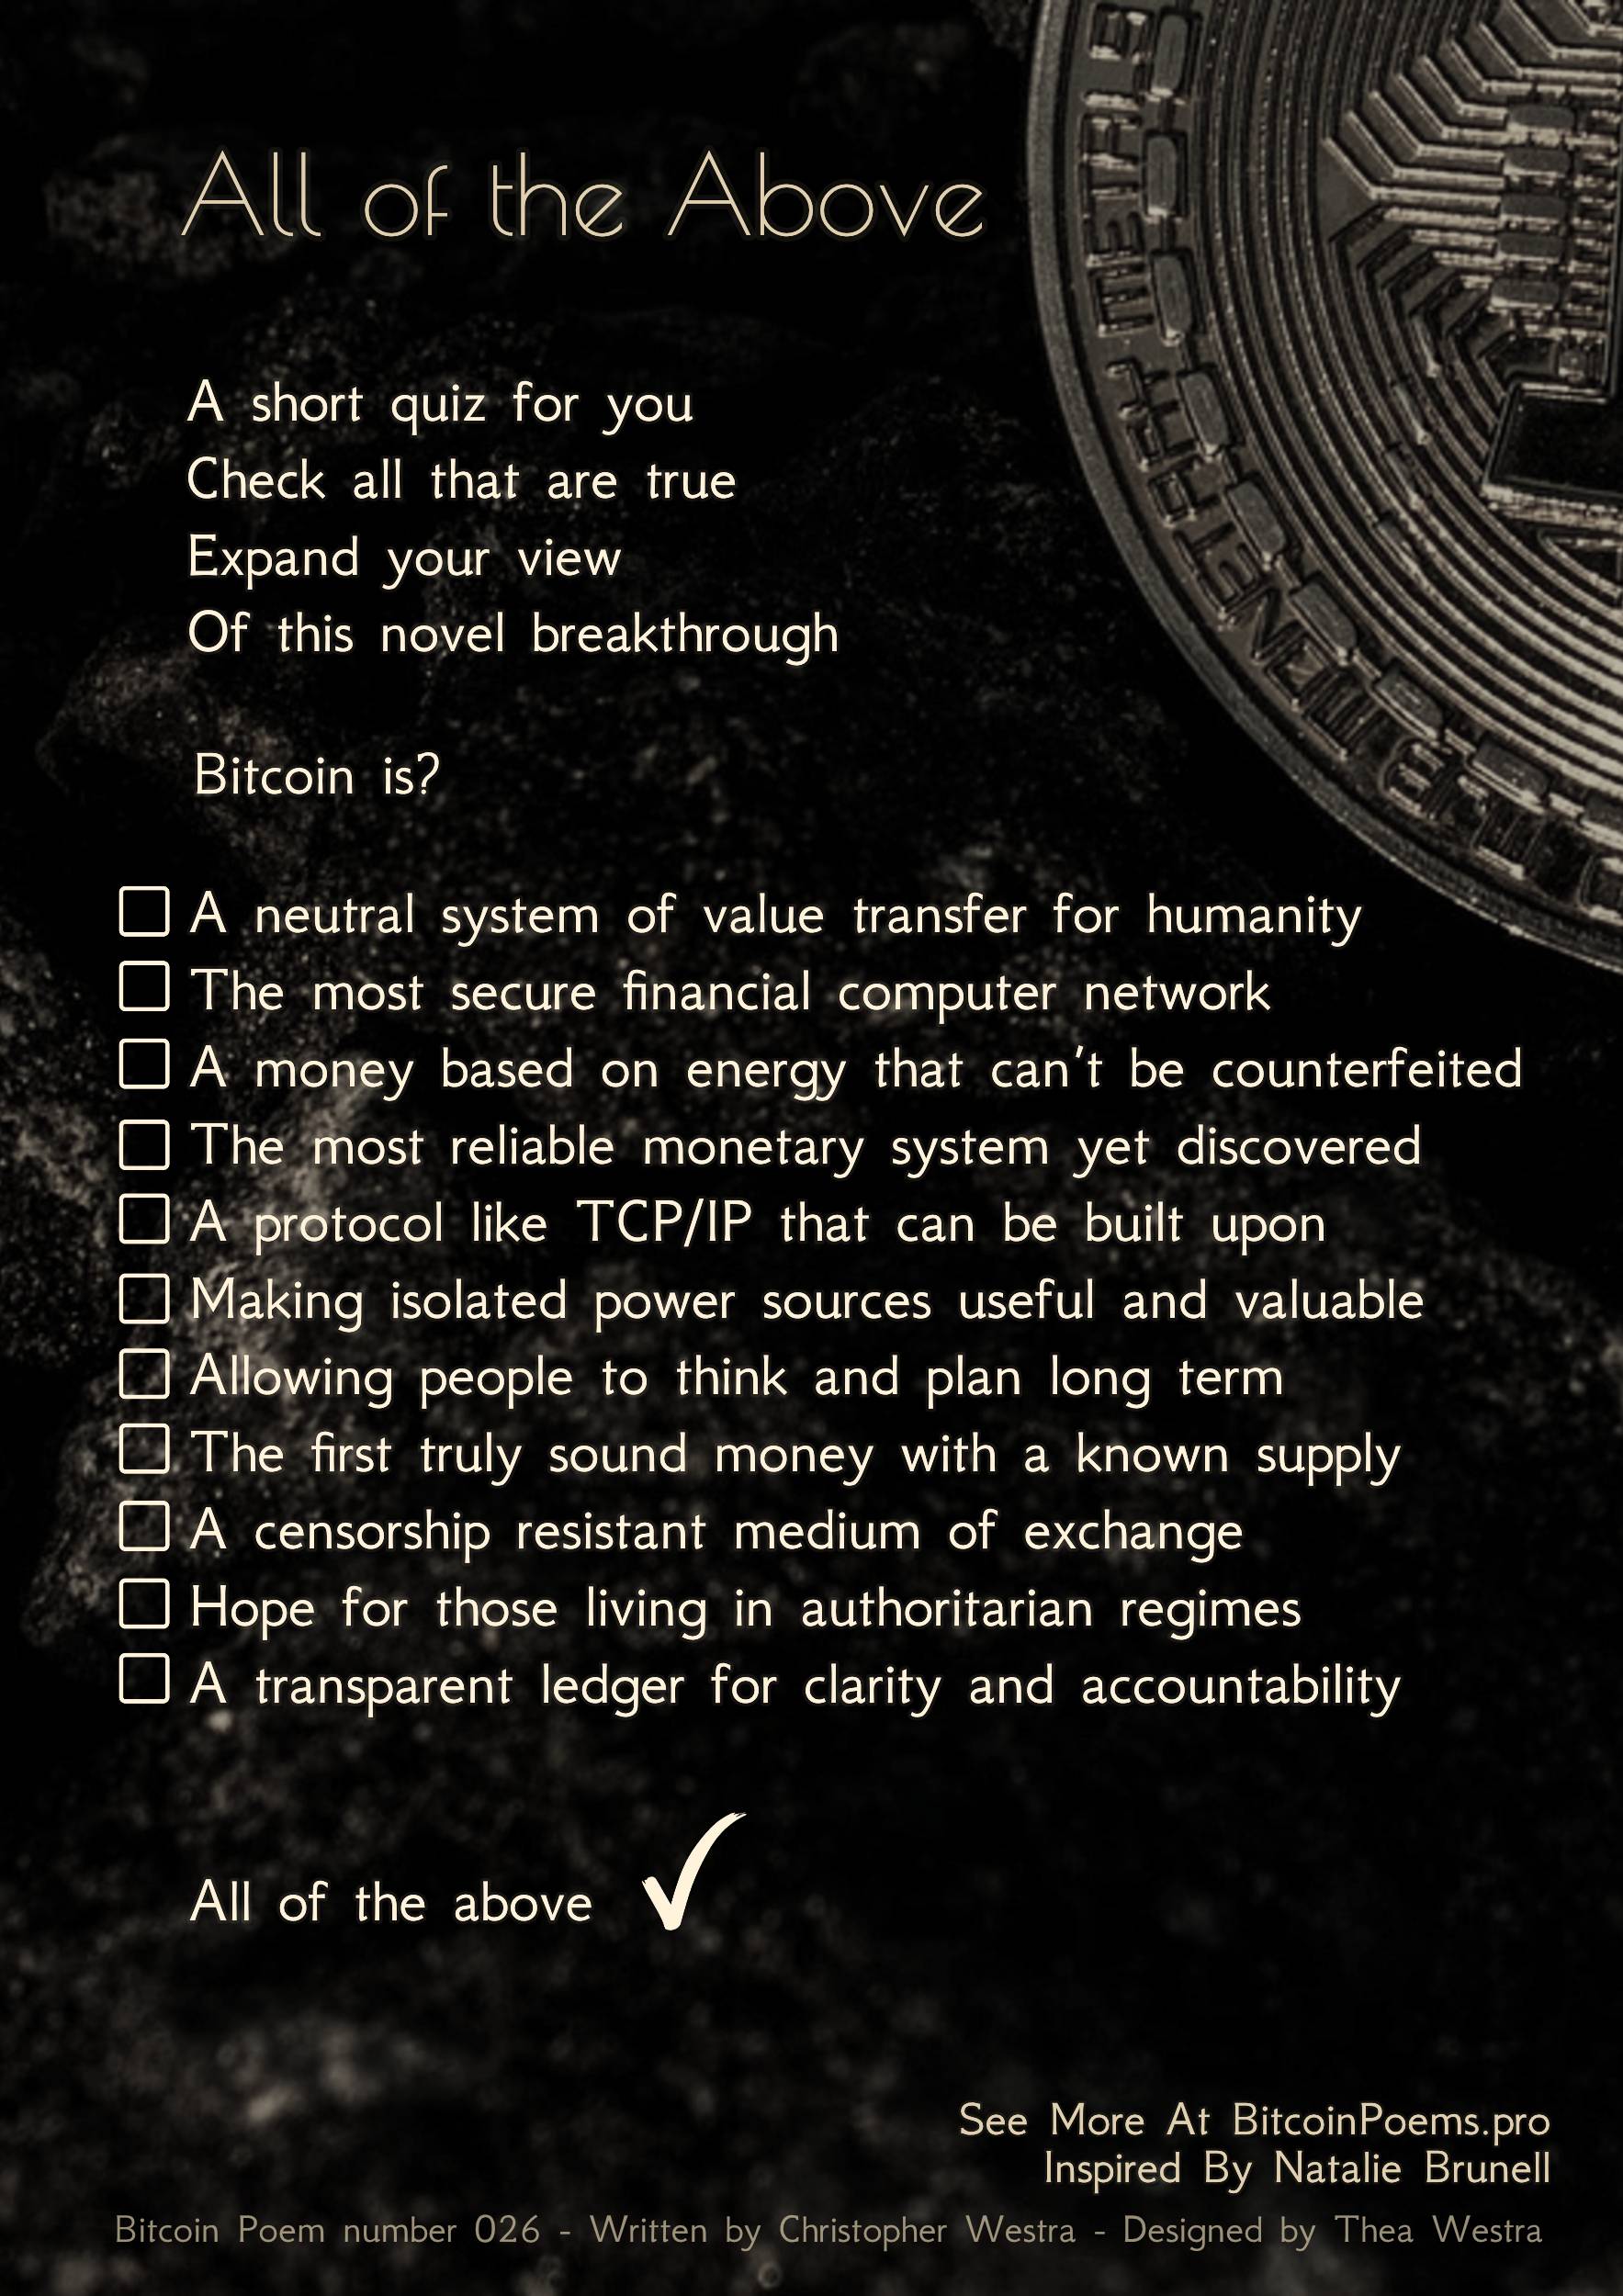 All of the Above - Bitcoin Poem 026 by Christopher Westra